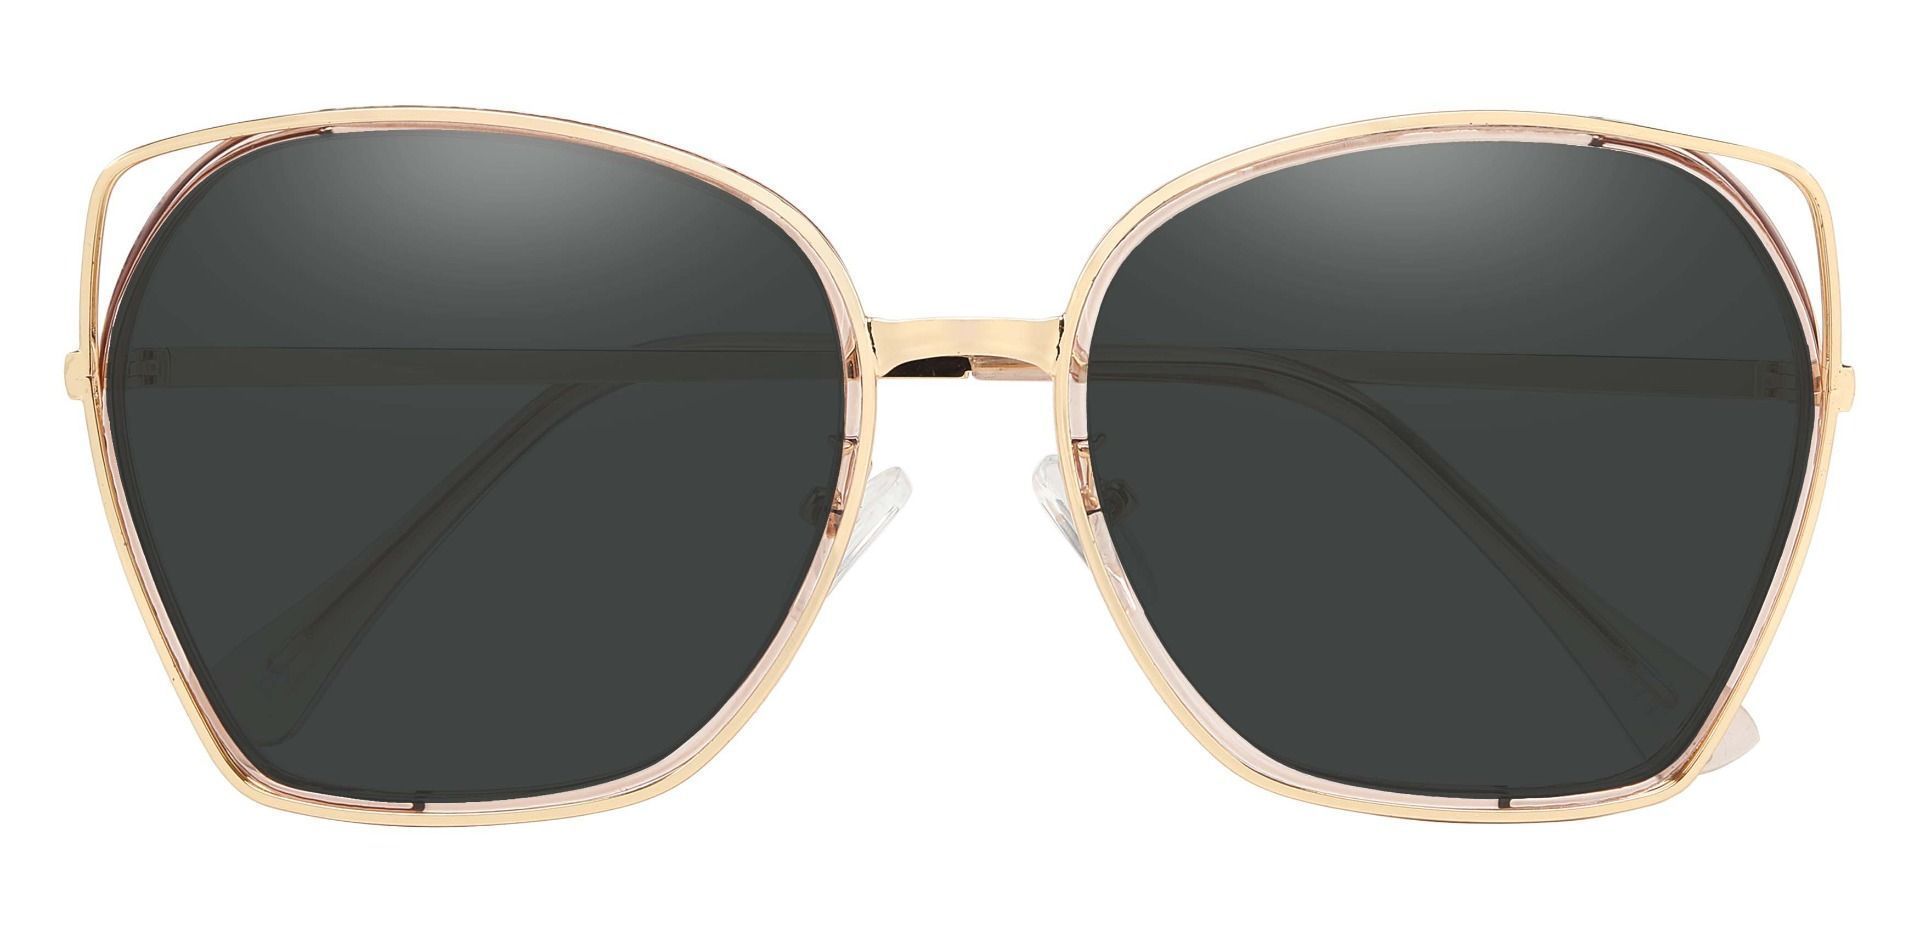 Tabby Geometric Non-Rx Sunglasses - Pink Frame With Gray Lenses